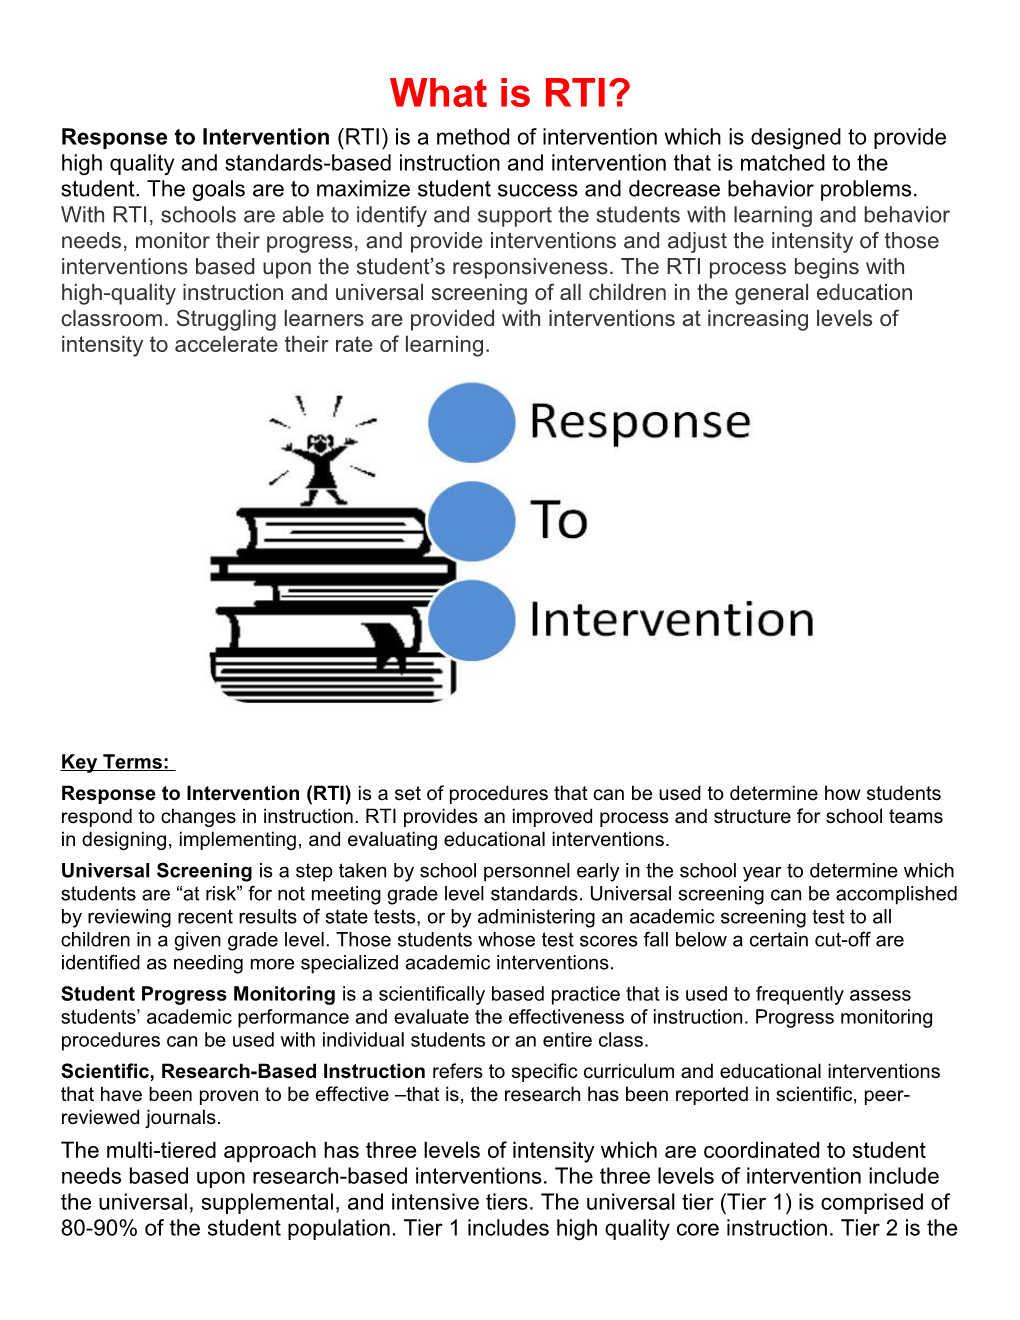 Response to Intervention (RTI) Is a Set of Procedures That Can Be Used to Determine How